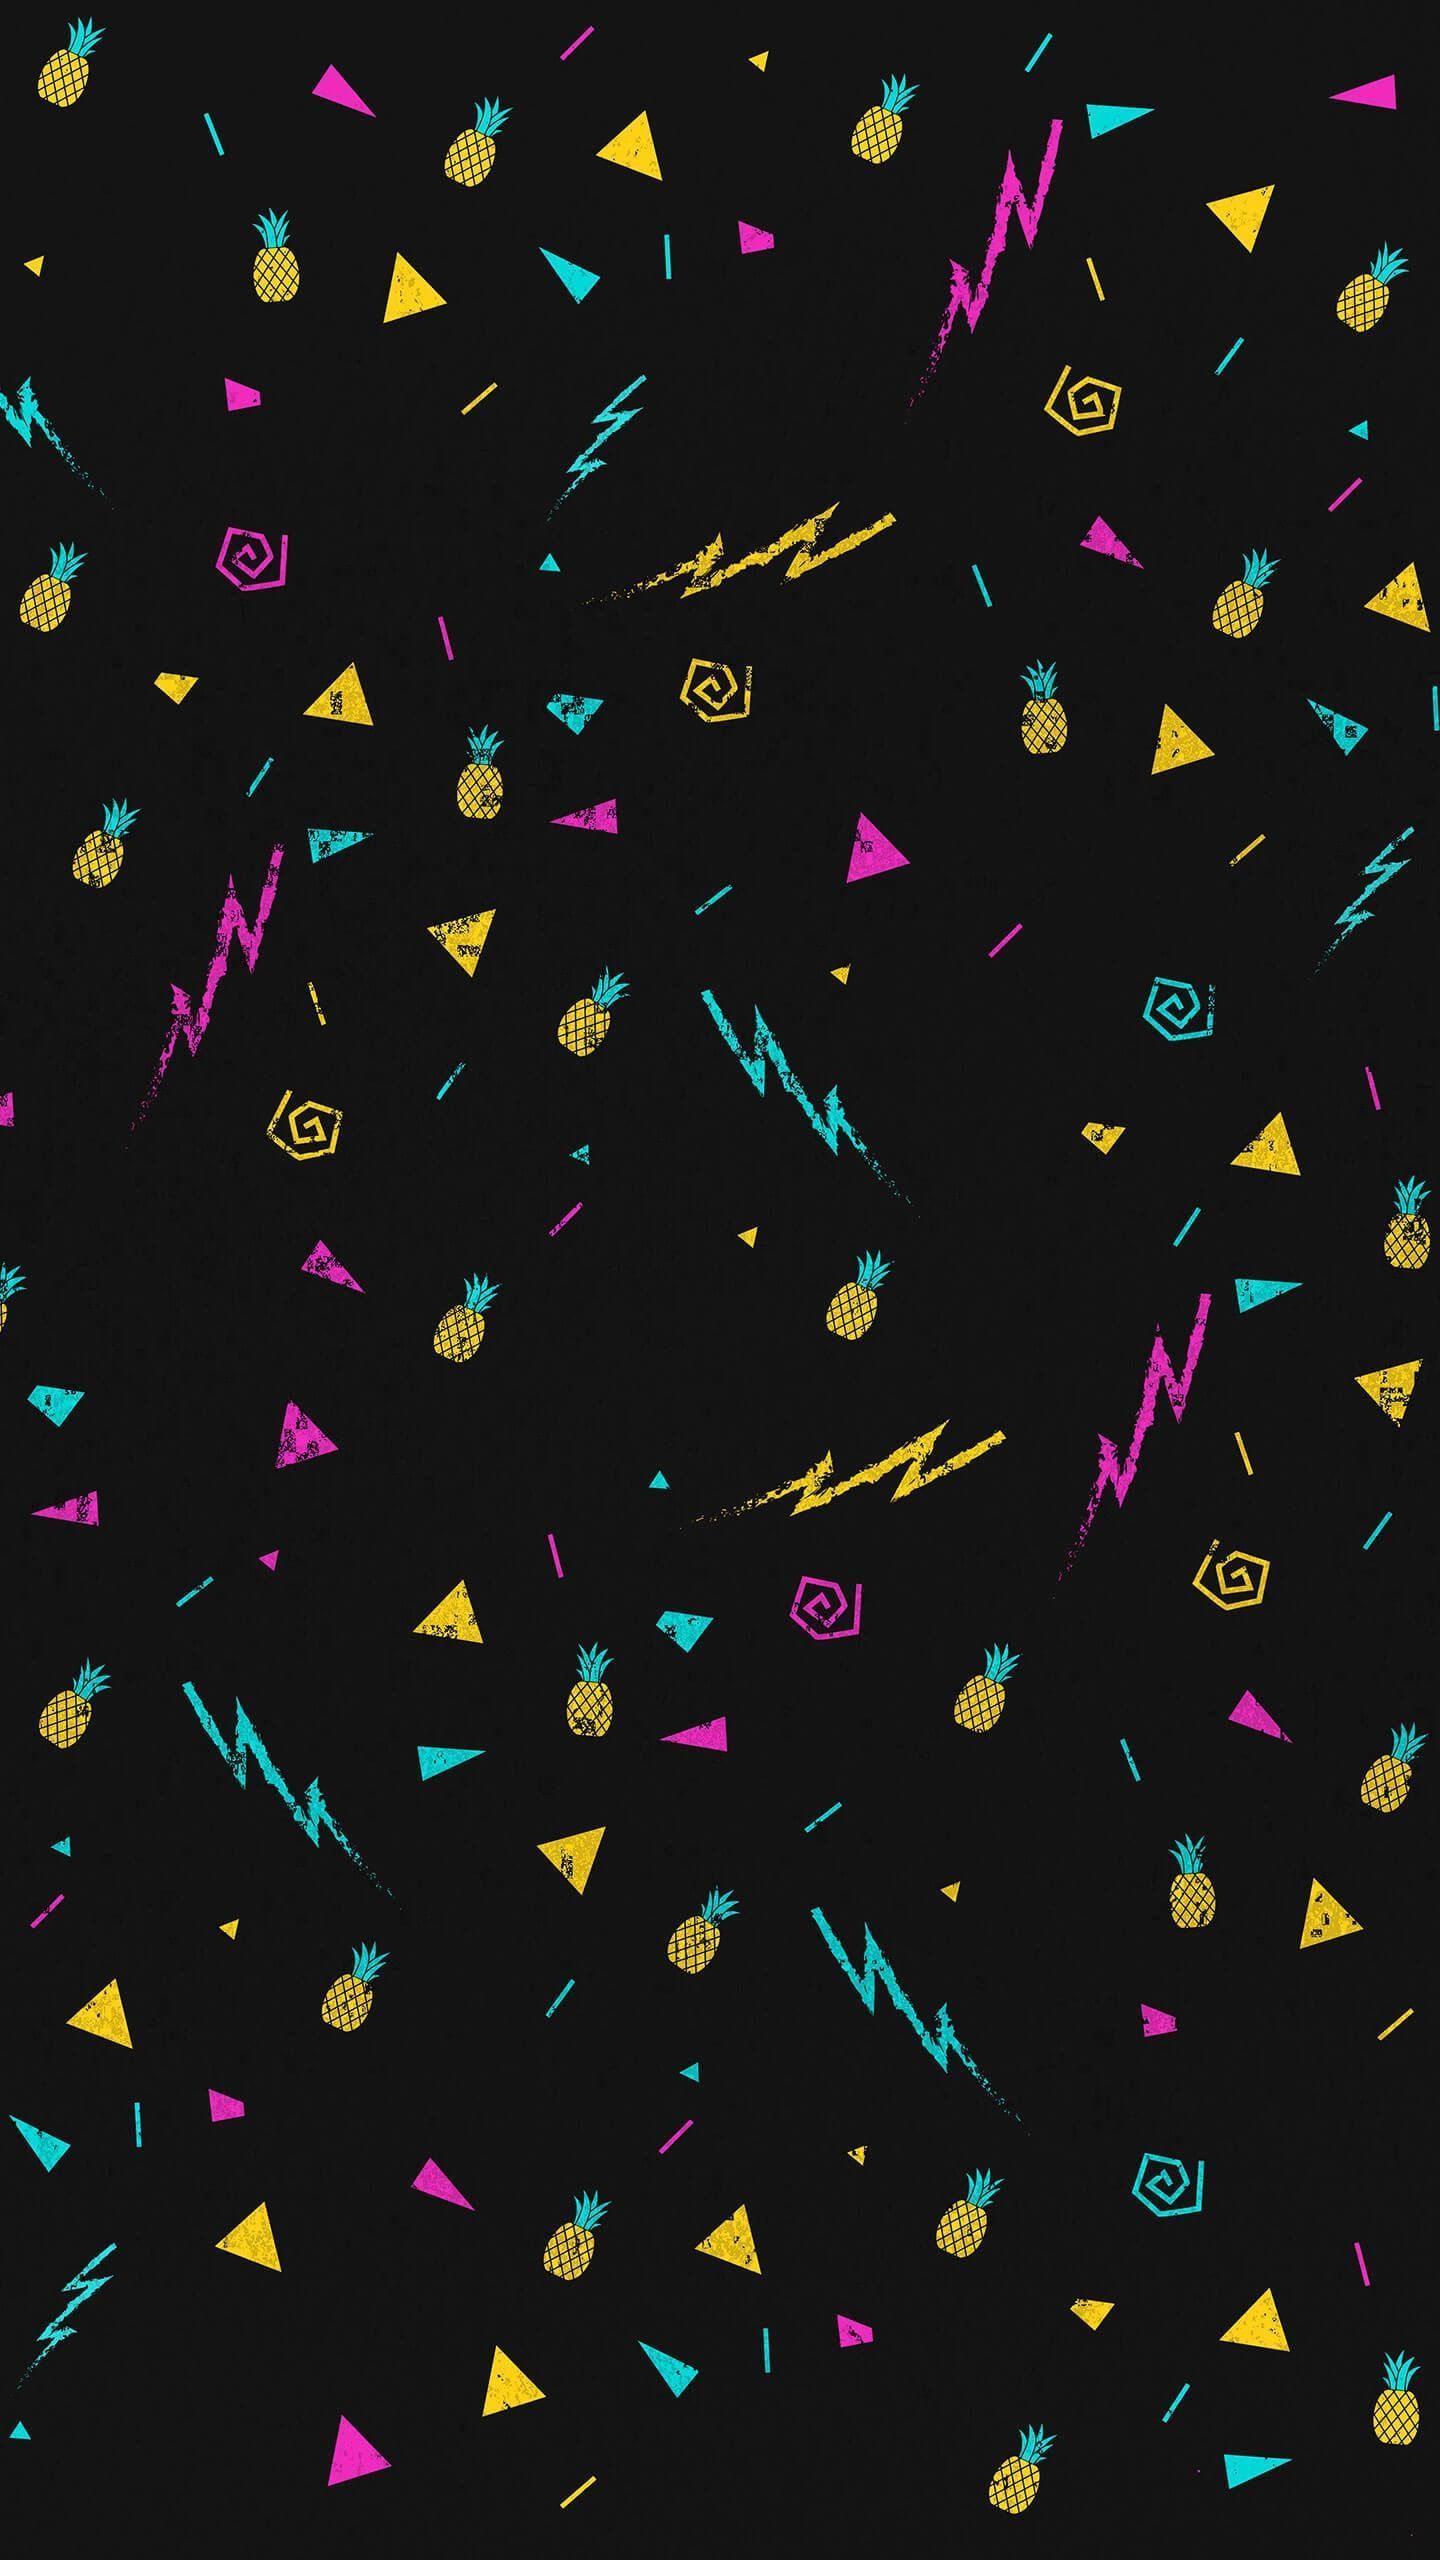 A pattern of colorful shapes on black background - 80s